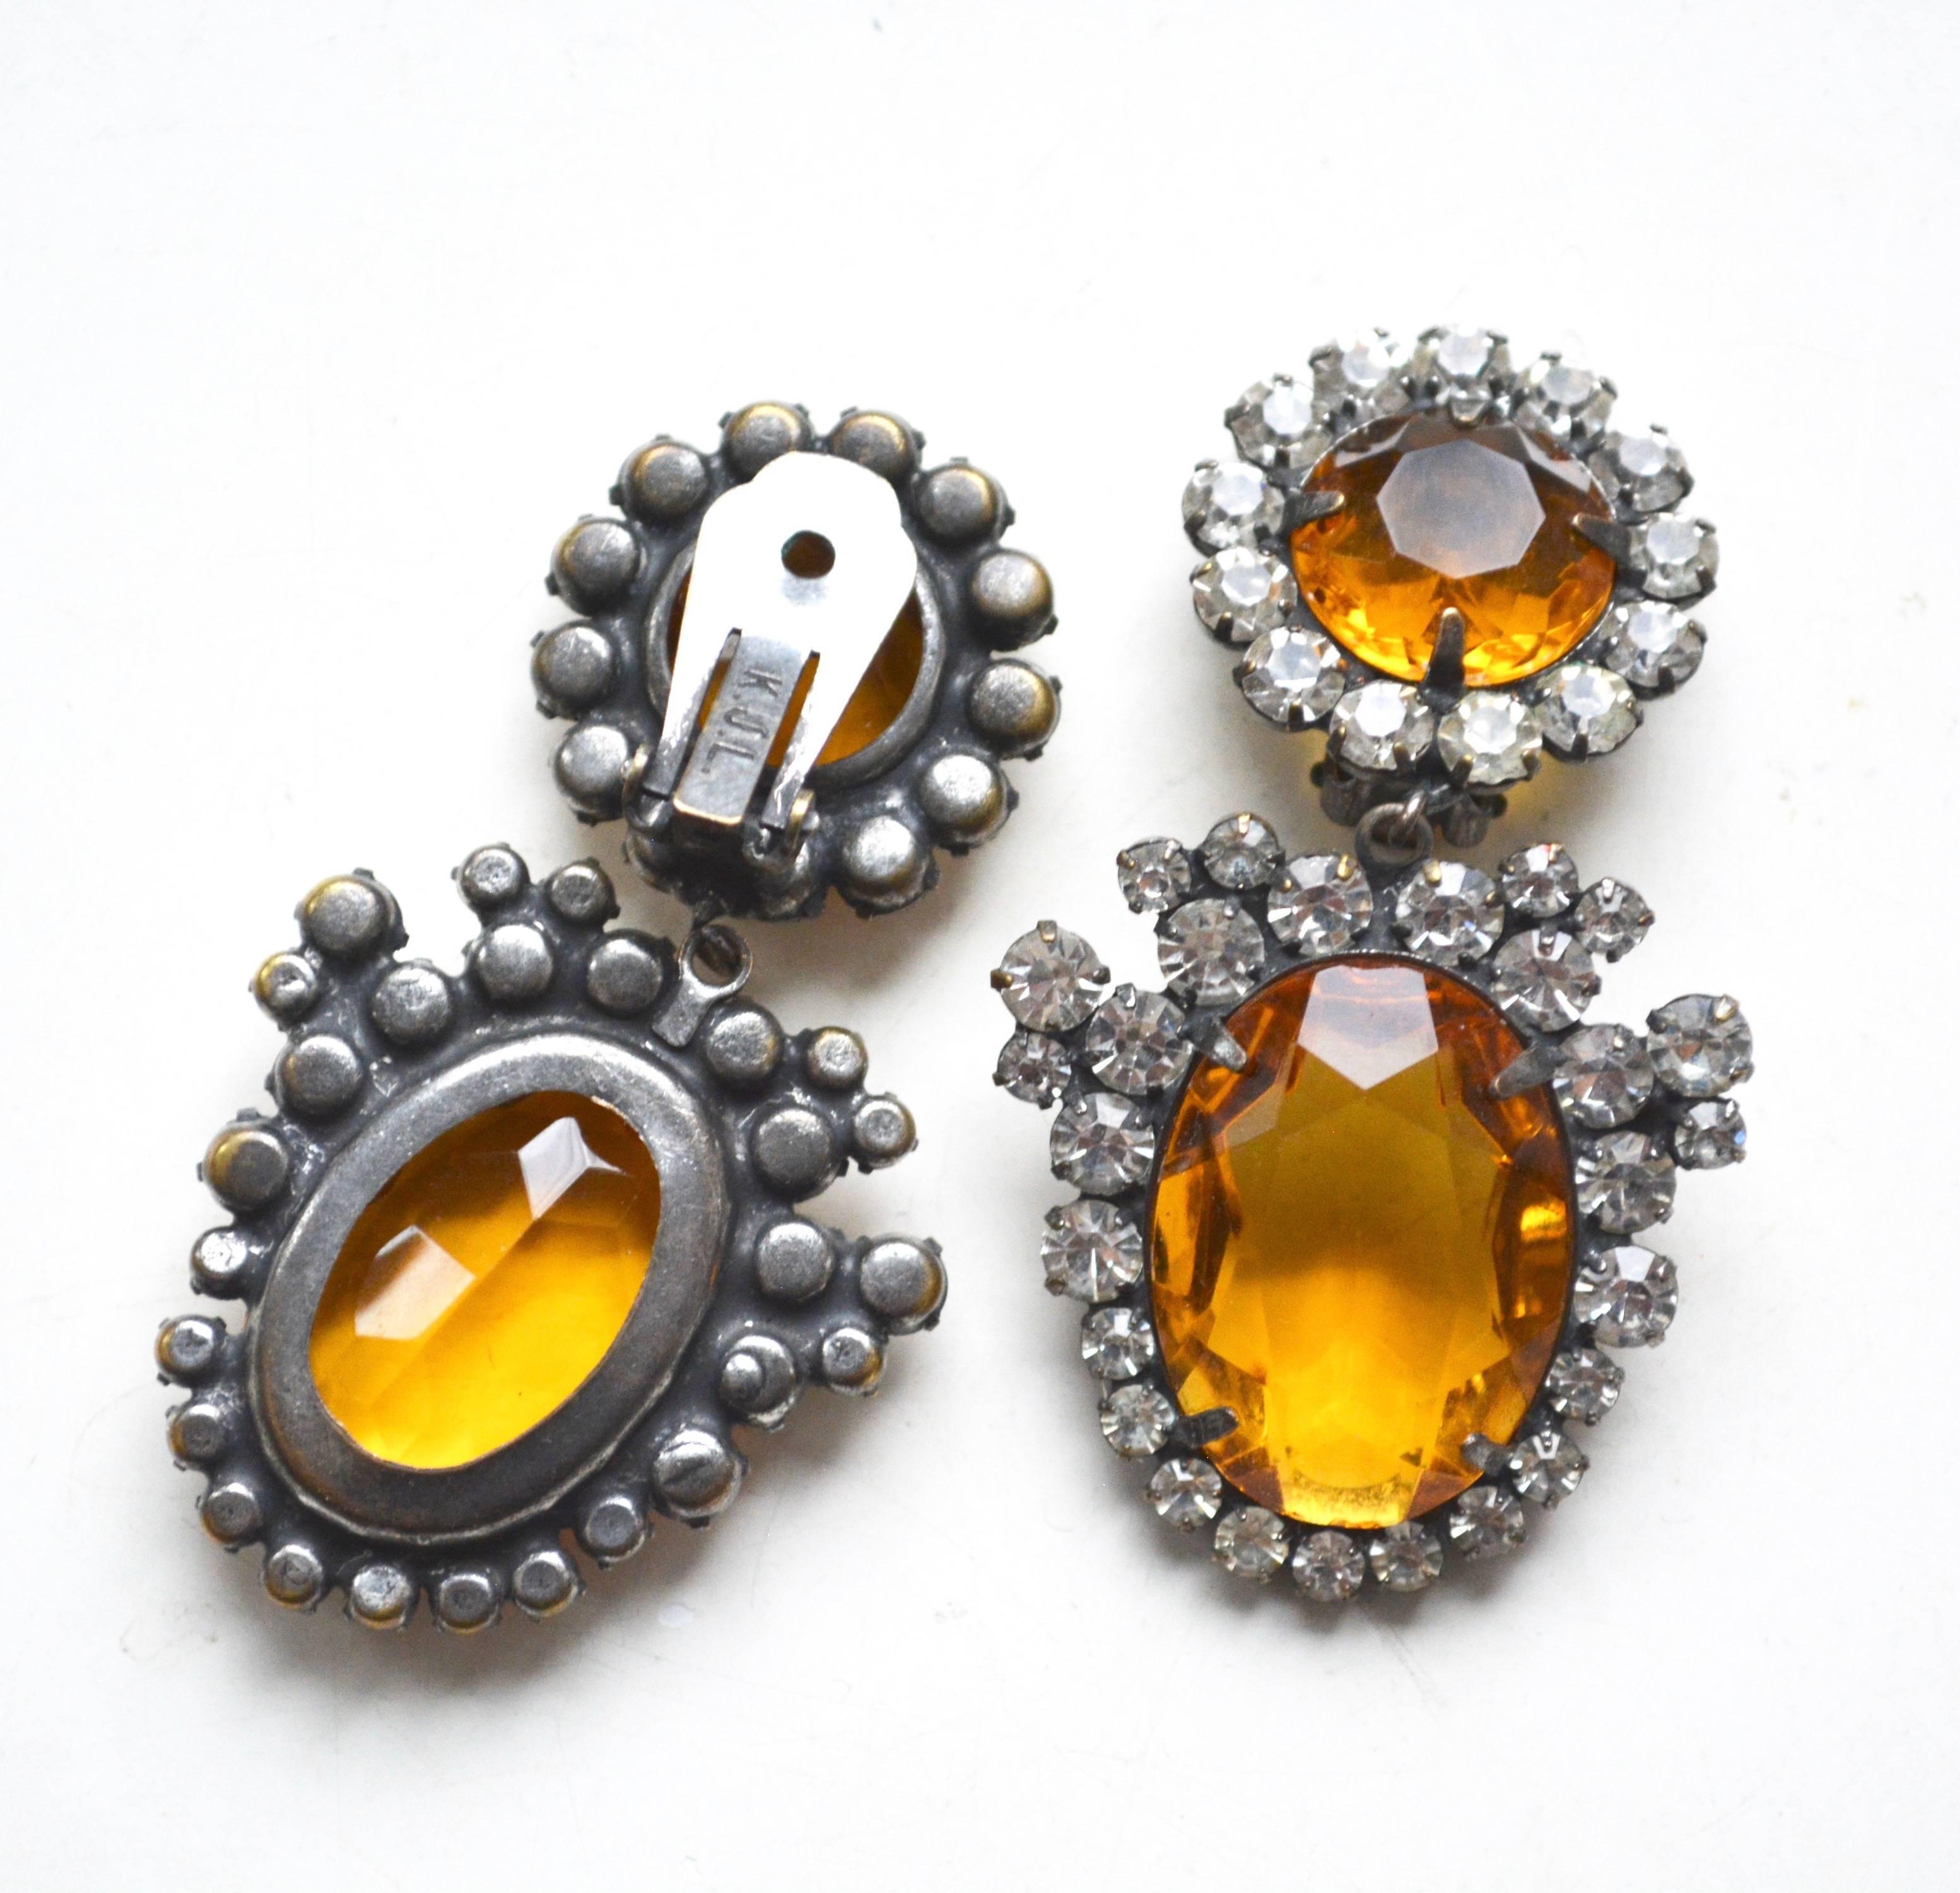 Signed Kenneth Jay Lane earrings in a lovely amber toned glass with rhinestone accents.  2.5